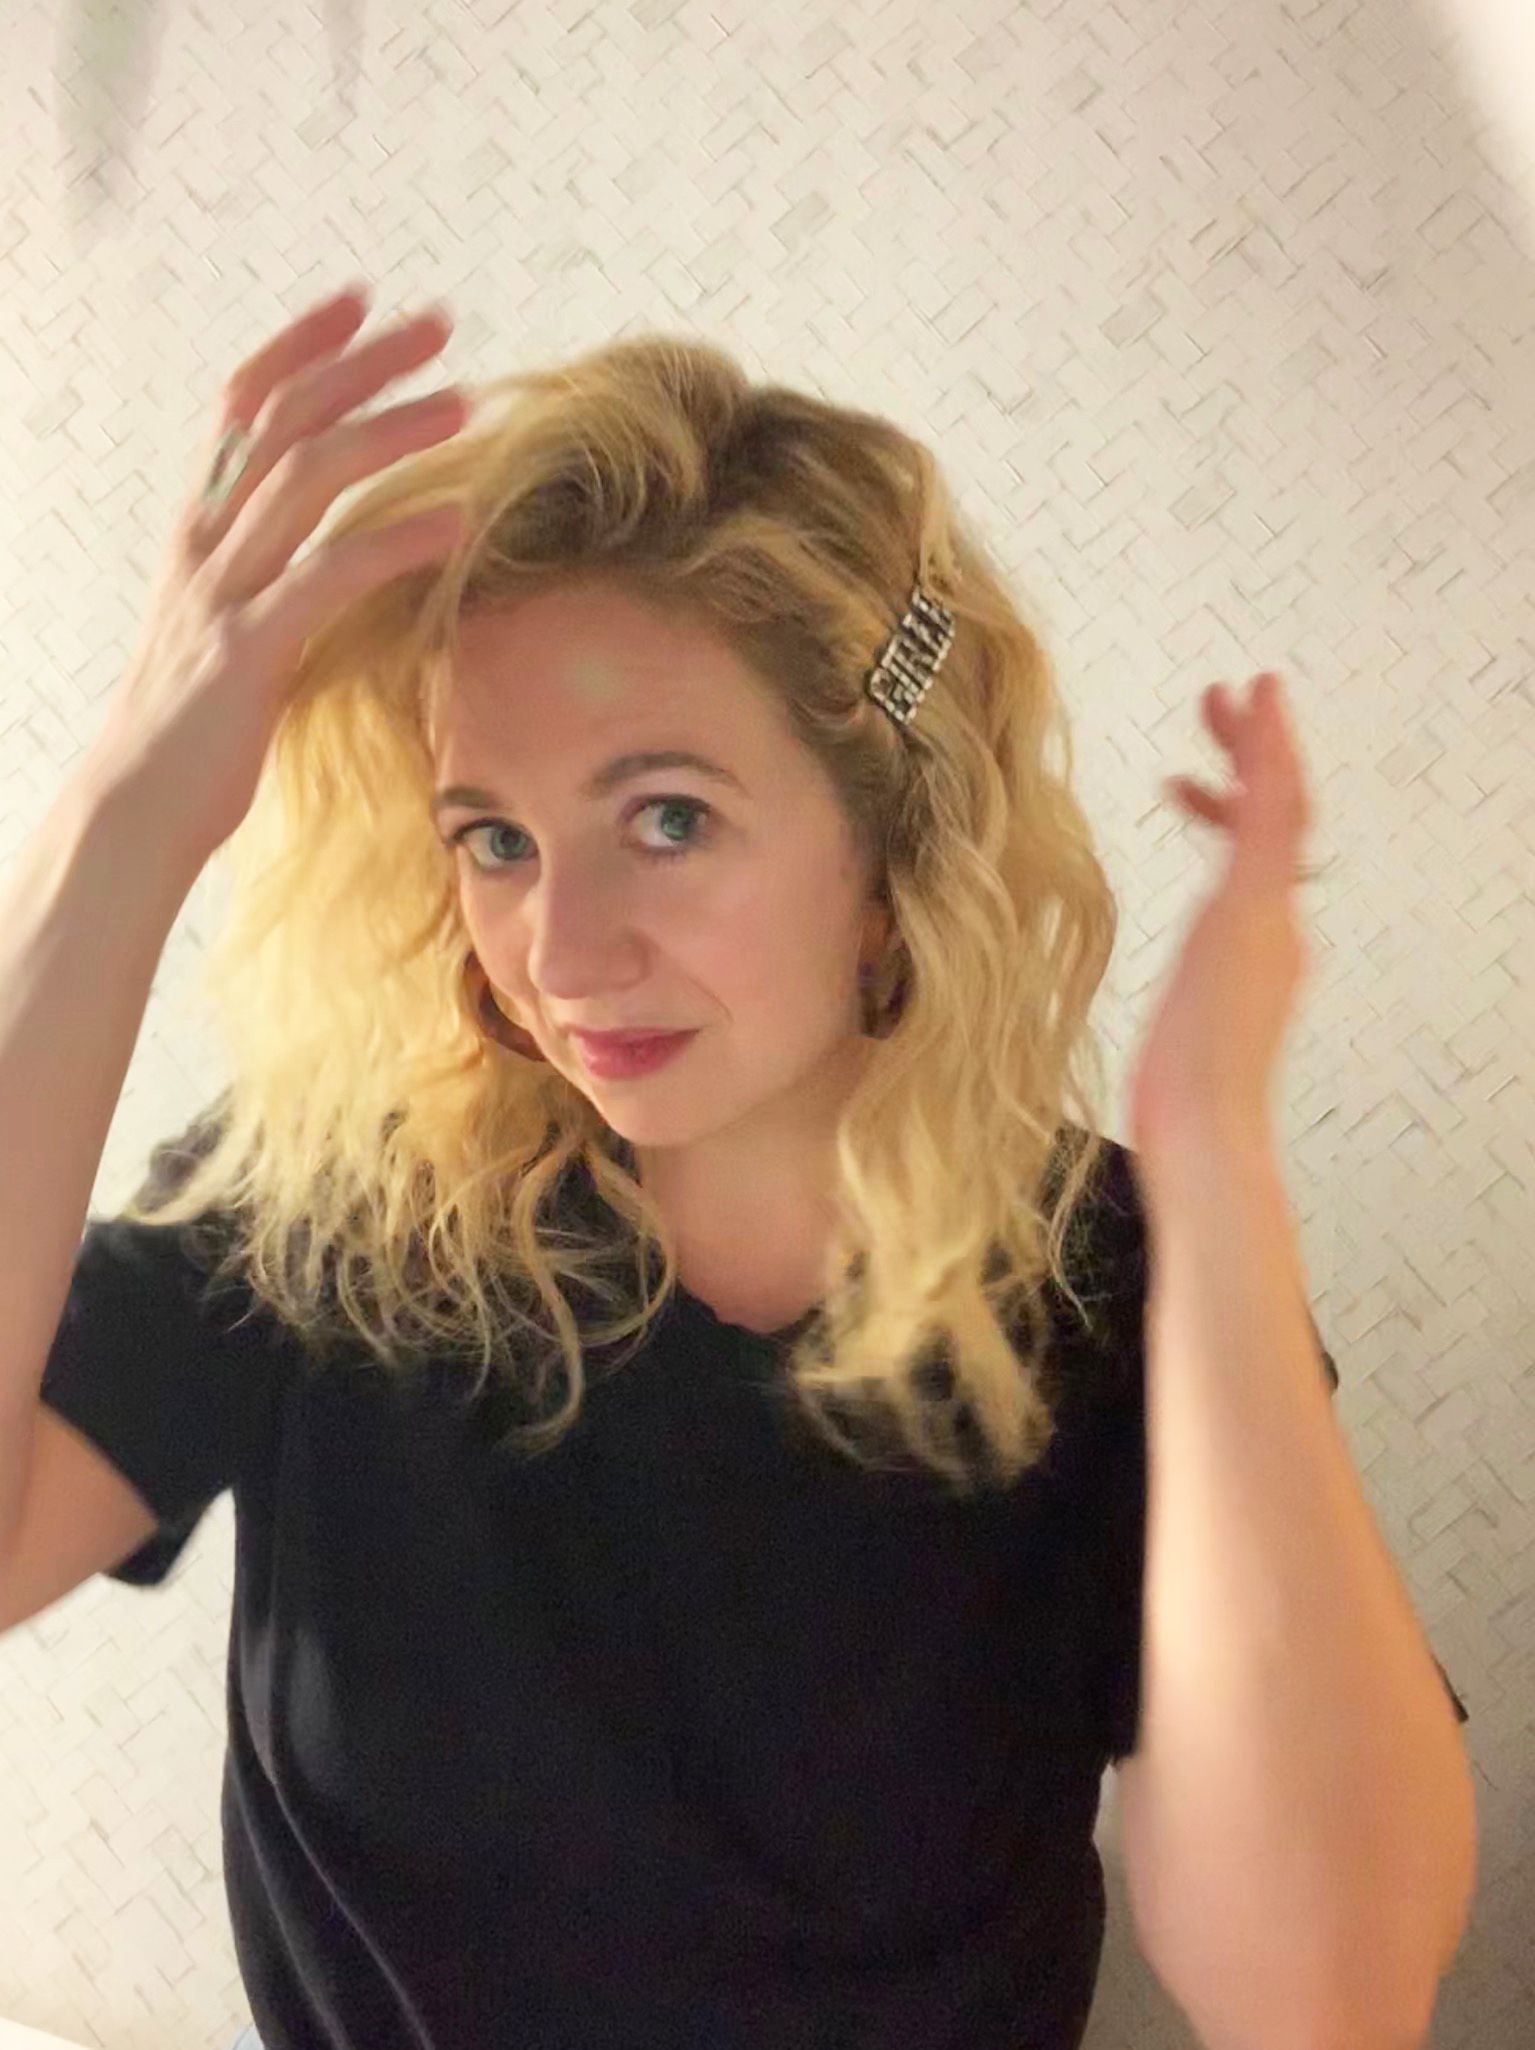 How to Use Hairspray on Curly Hair, According to Celeb Hairstylist